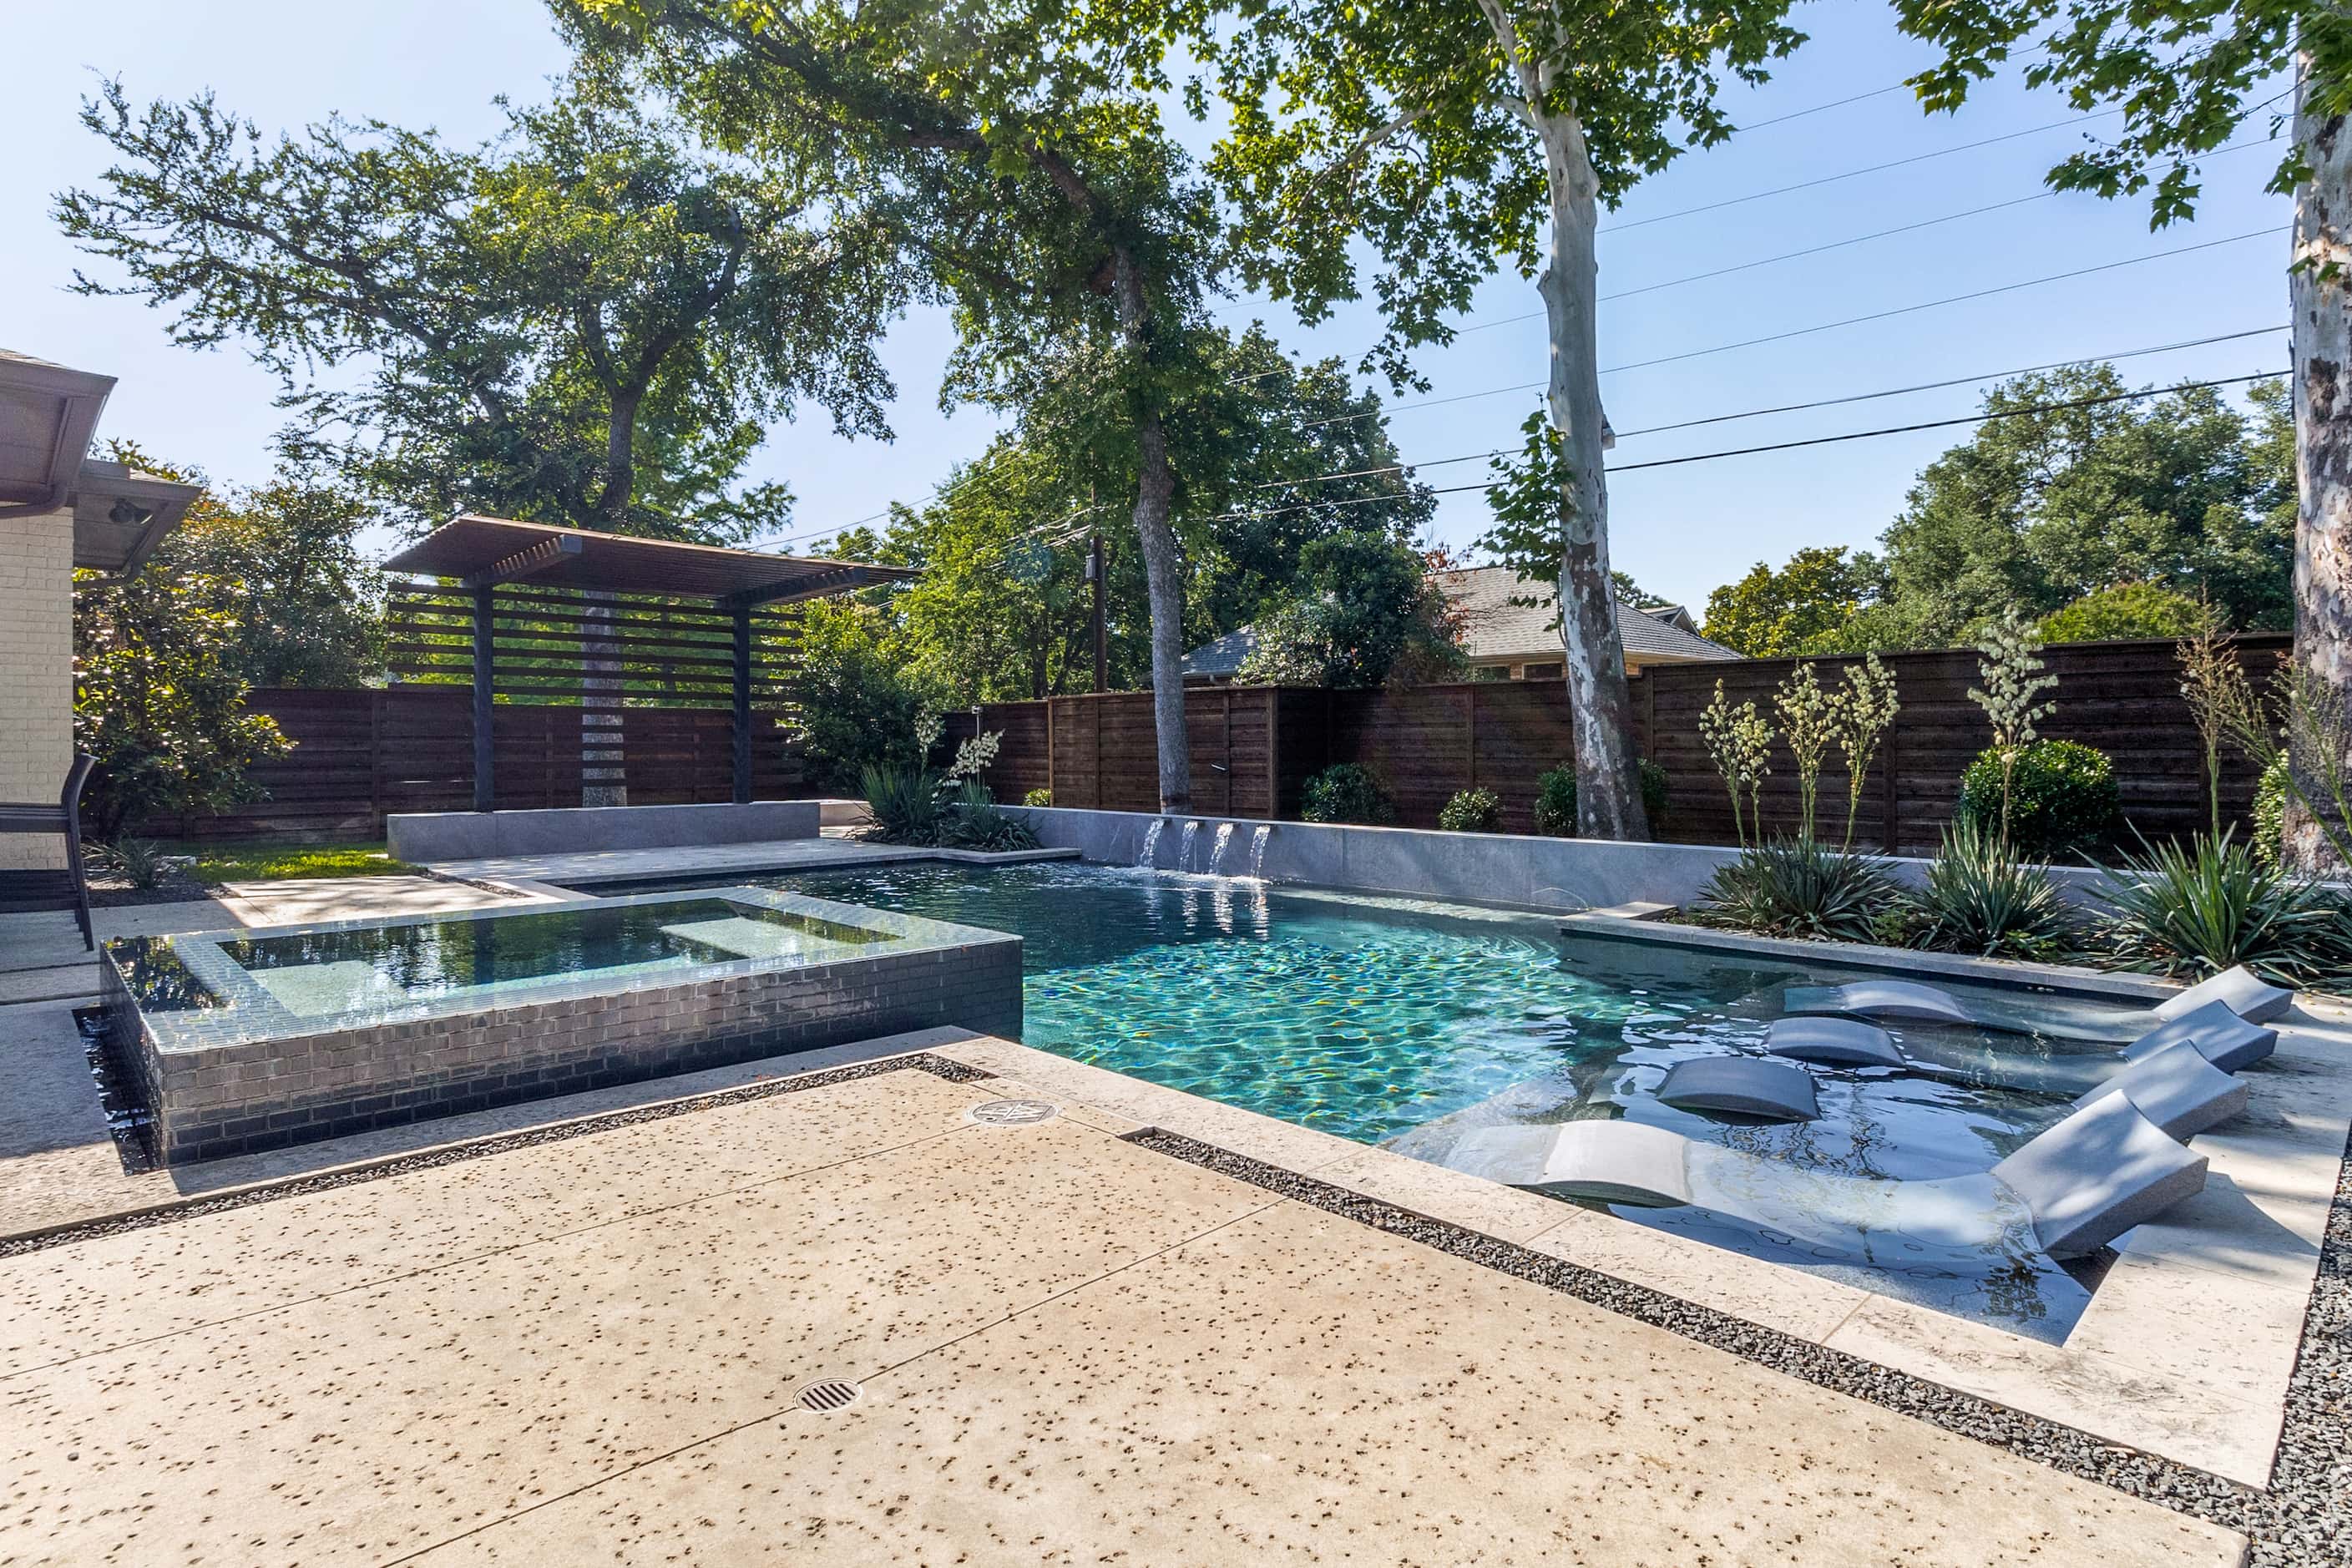 LIV golfer Bryson DeChambeau is selling his $3 million Melshire Estates property. The 5-bed,...